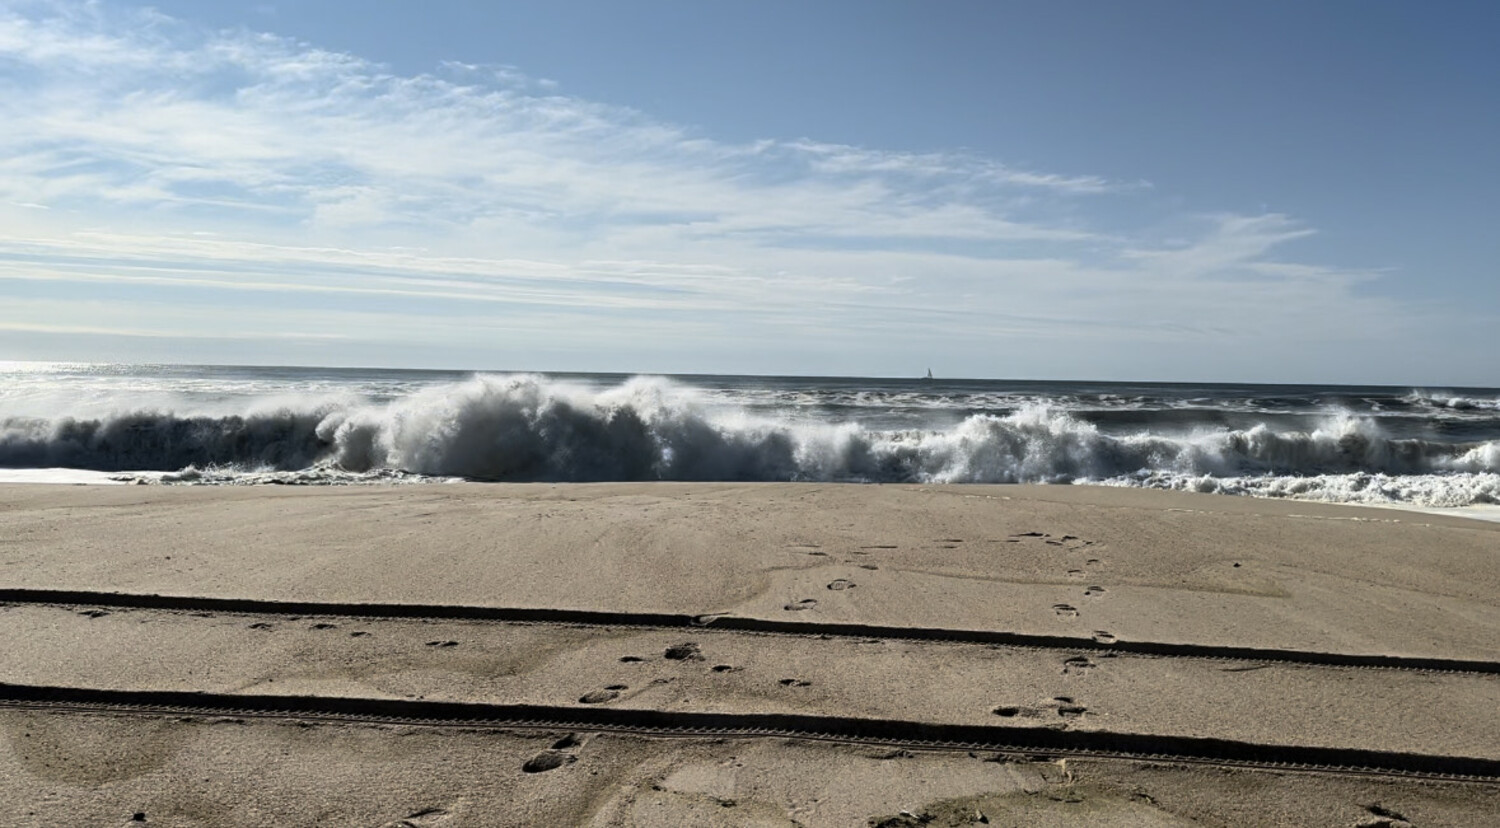 East Hampton Town has closed all of its ocean beaches as heavy surf from Hurricane Lee has created hazardous conditions.